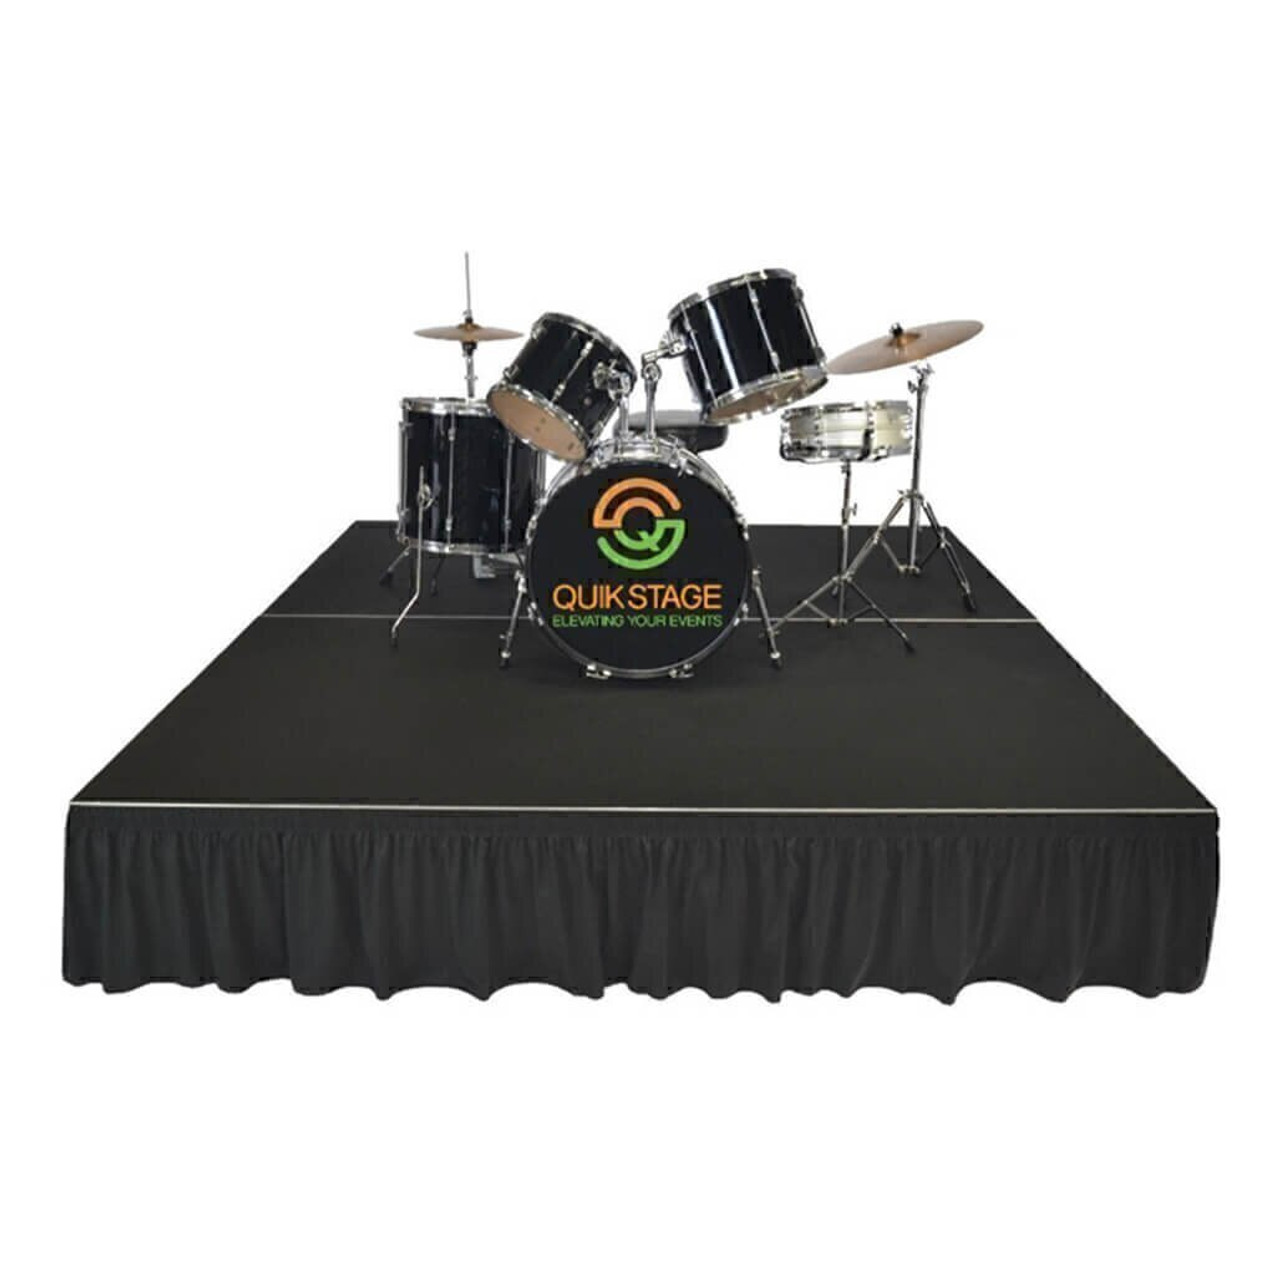 Top reviewed Quik Stage 16' x 32' High Portable Stage Package with Black Polyvinyl Non-Skid Surface. Additional Heights and Surfaces Available - Drum Riser with skirting